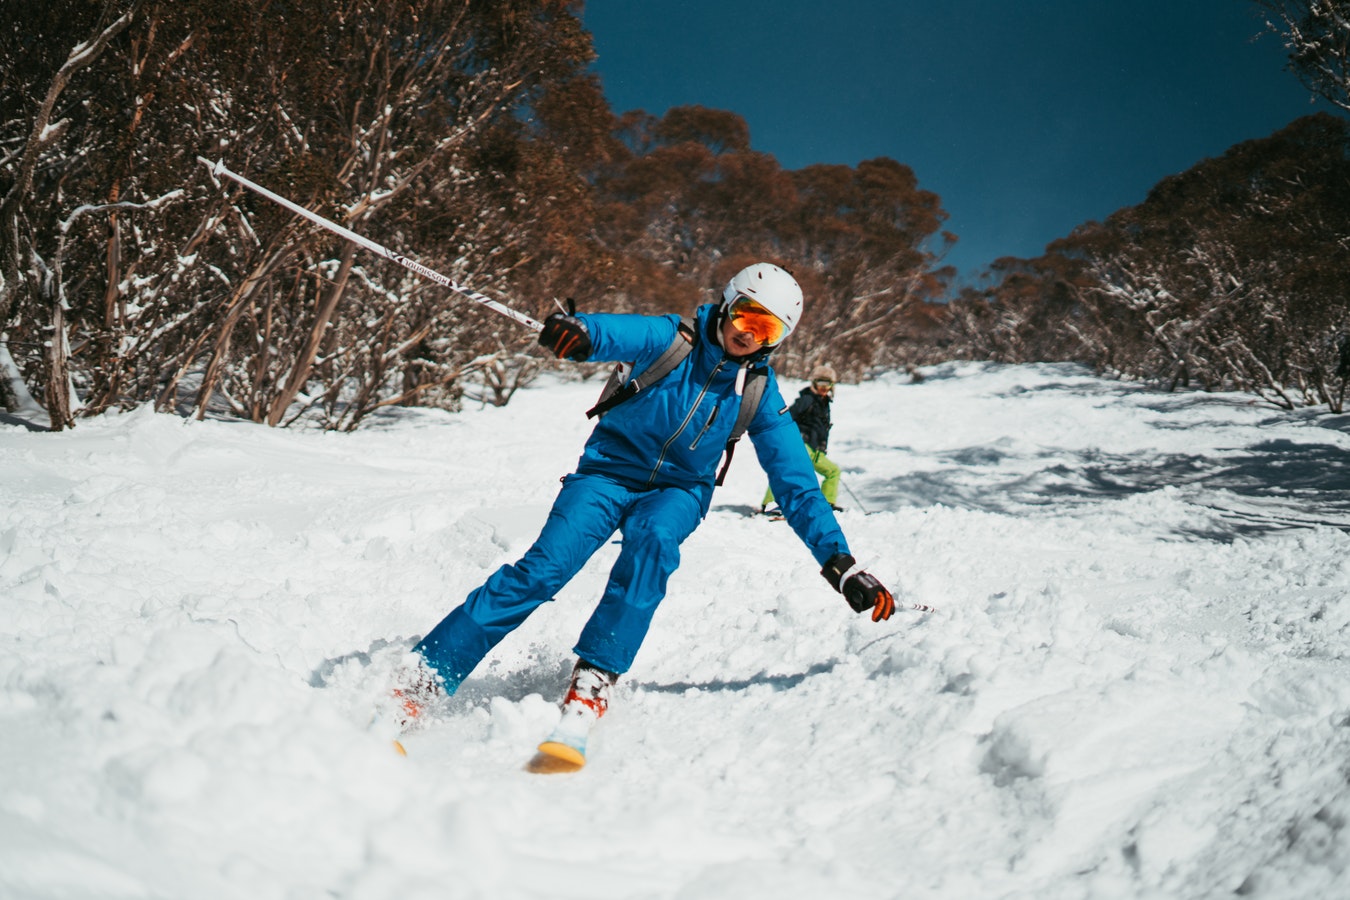 A person wearing all blue snow clothing, skiing down a steep snowy slope with trees either side